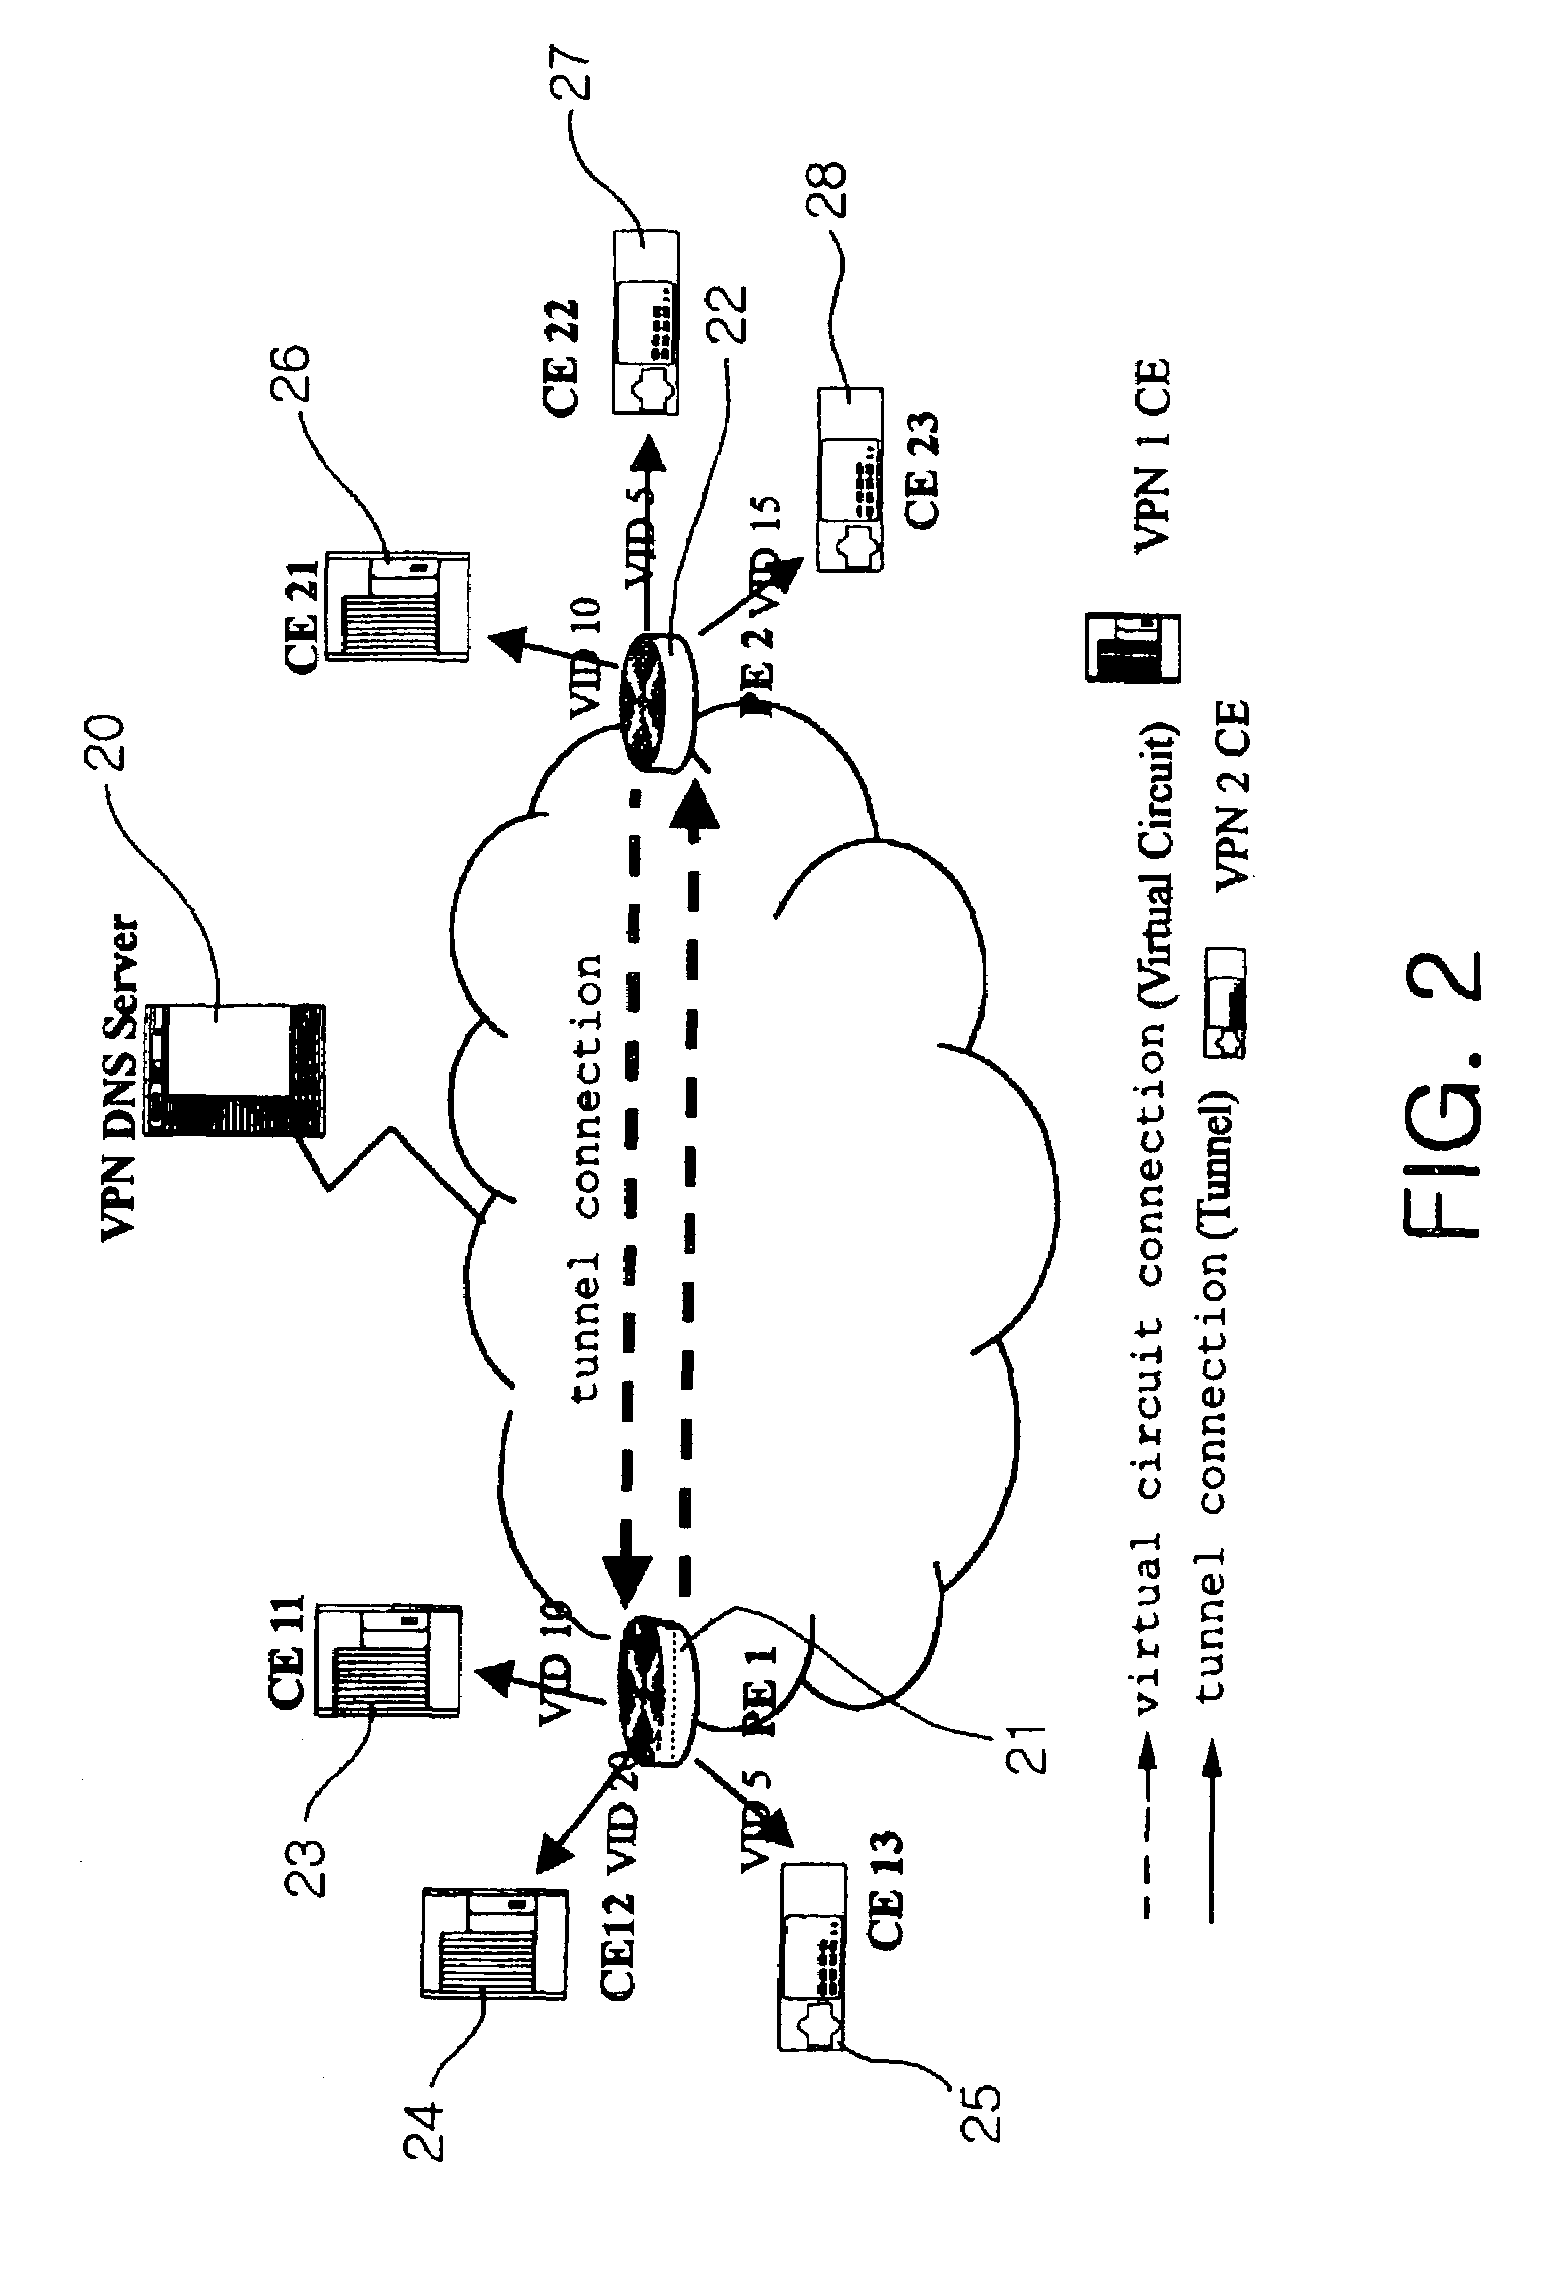 Method for setting up QoS supported bi-directional tunnel and distributing L2VPN membership information for L2VPN using extended LDP